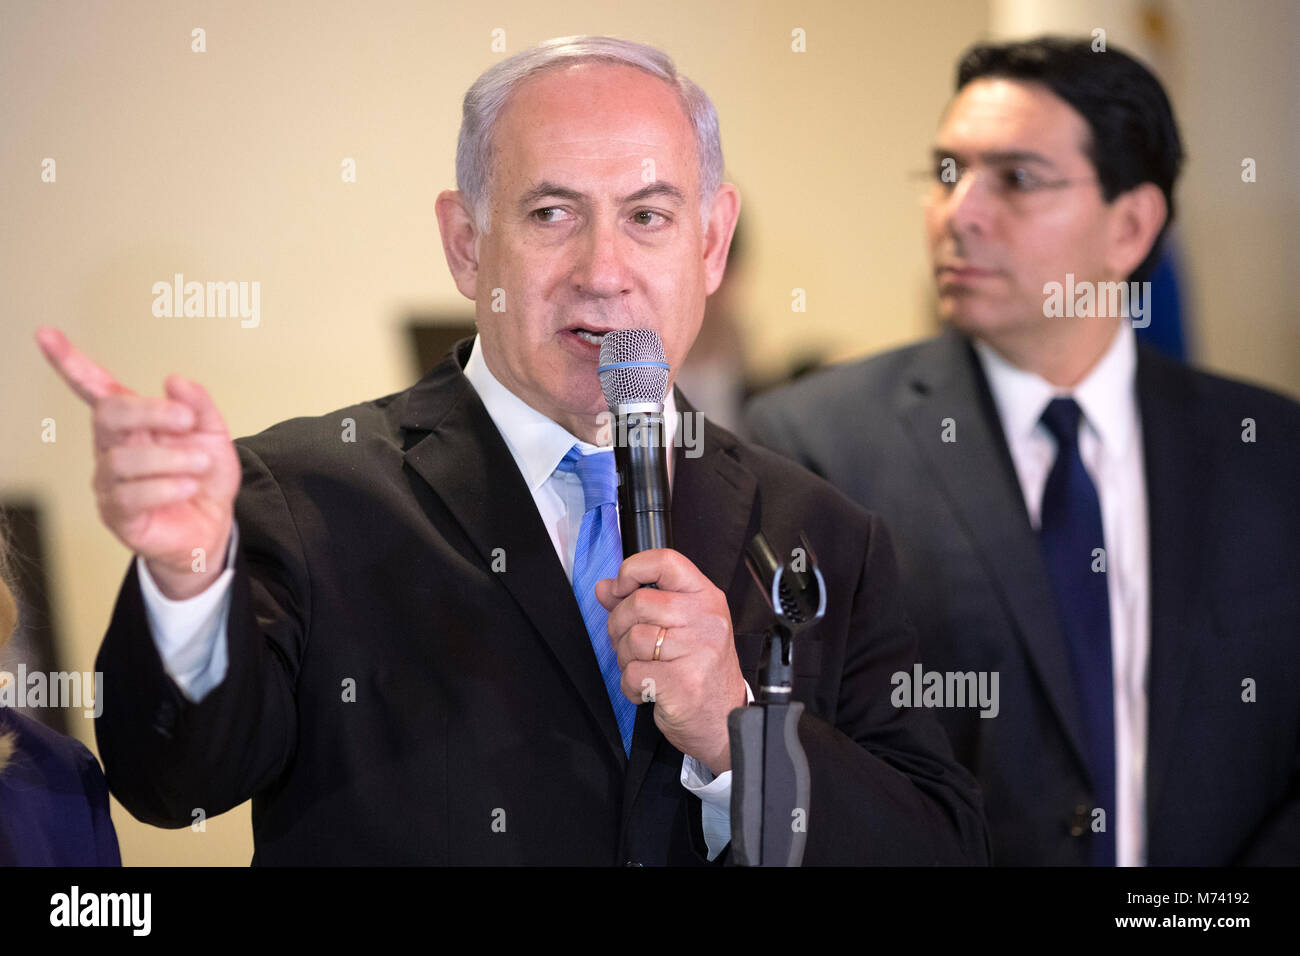 (180308) -- UNITED NATIONS, March 8, 2018 (Xinhua) -- Israeli Prime Minister Benjamin Netanyahu (L) speaks to the press during the exhibition '3000 years of history: Jews in Jerusalem' at the United Nations headquarters in New York, March 8, 2018. (Xinhua/Li Muzi) Stock Photo